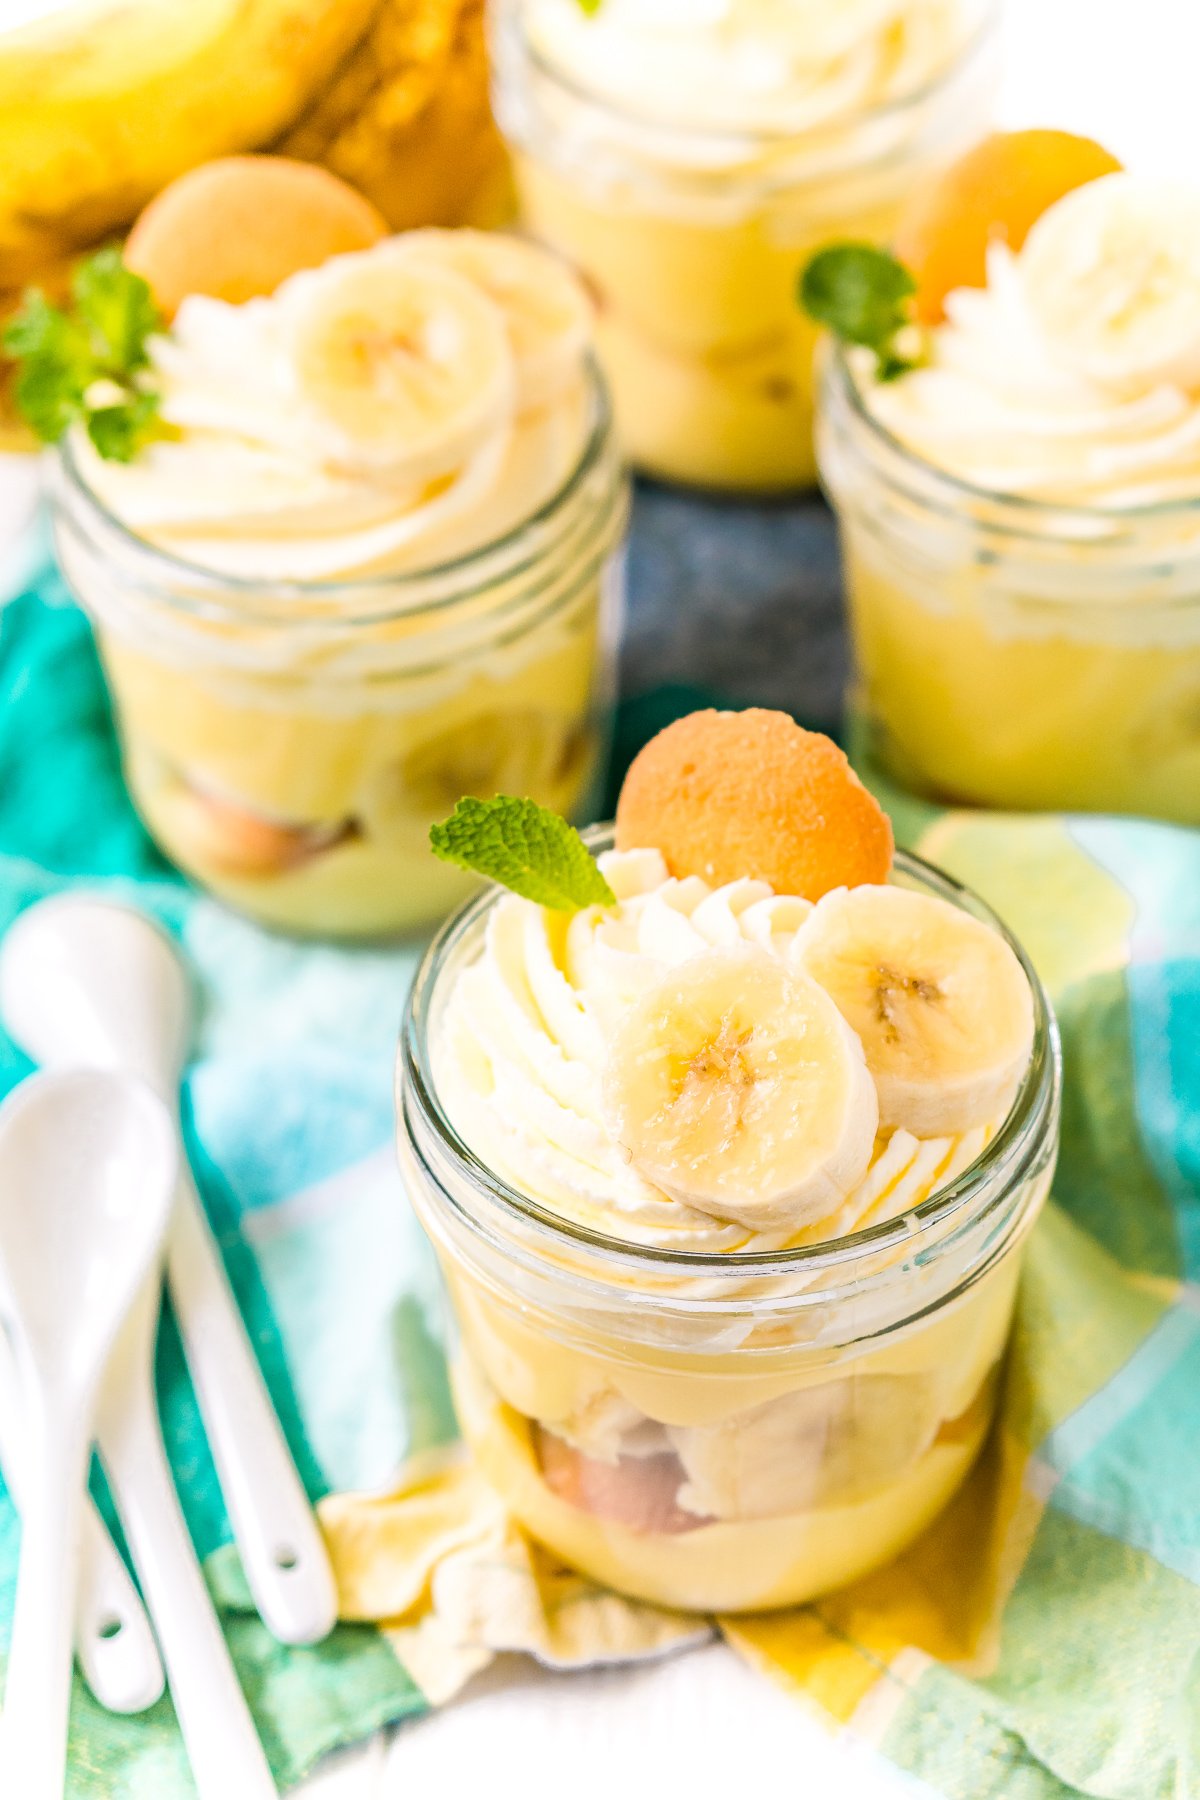 Mini mason jars with banana pudding in them on a blue and yellow napkin with white spoons to the side.